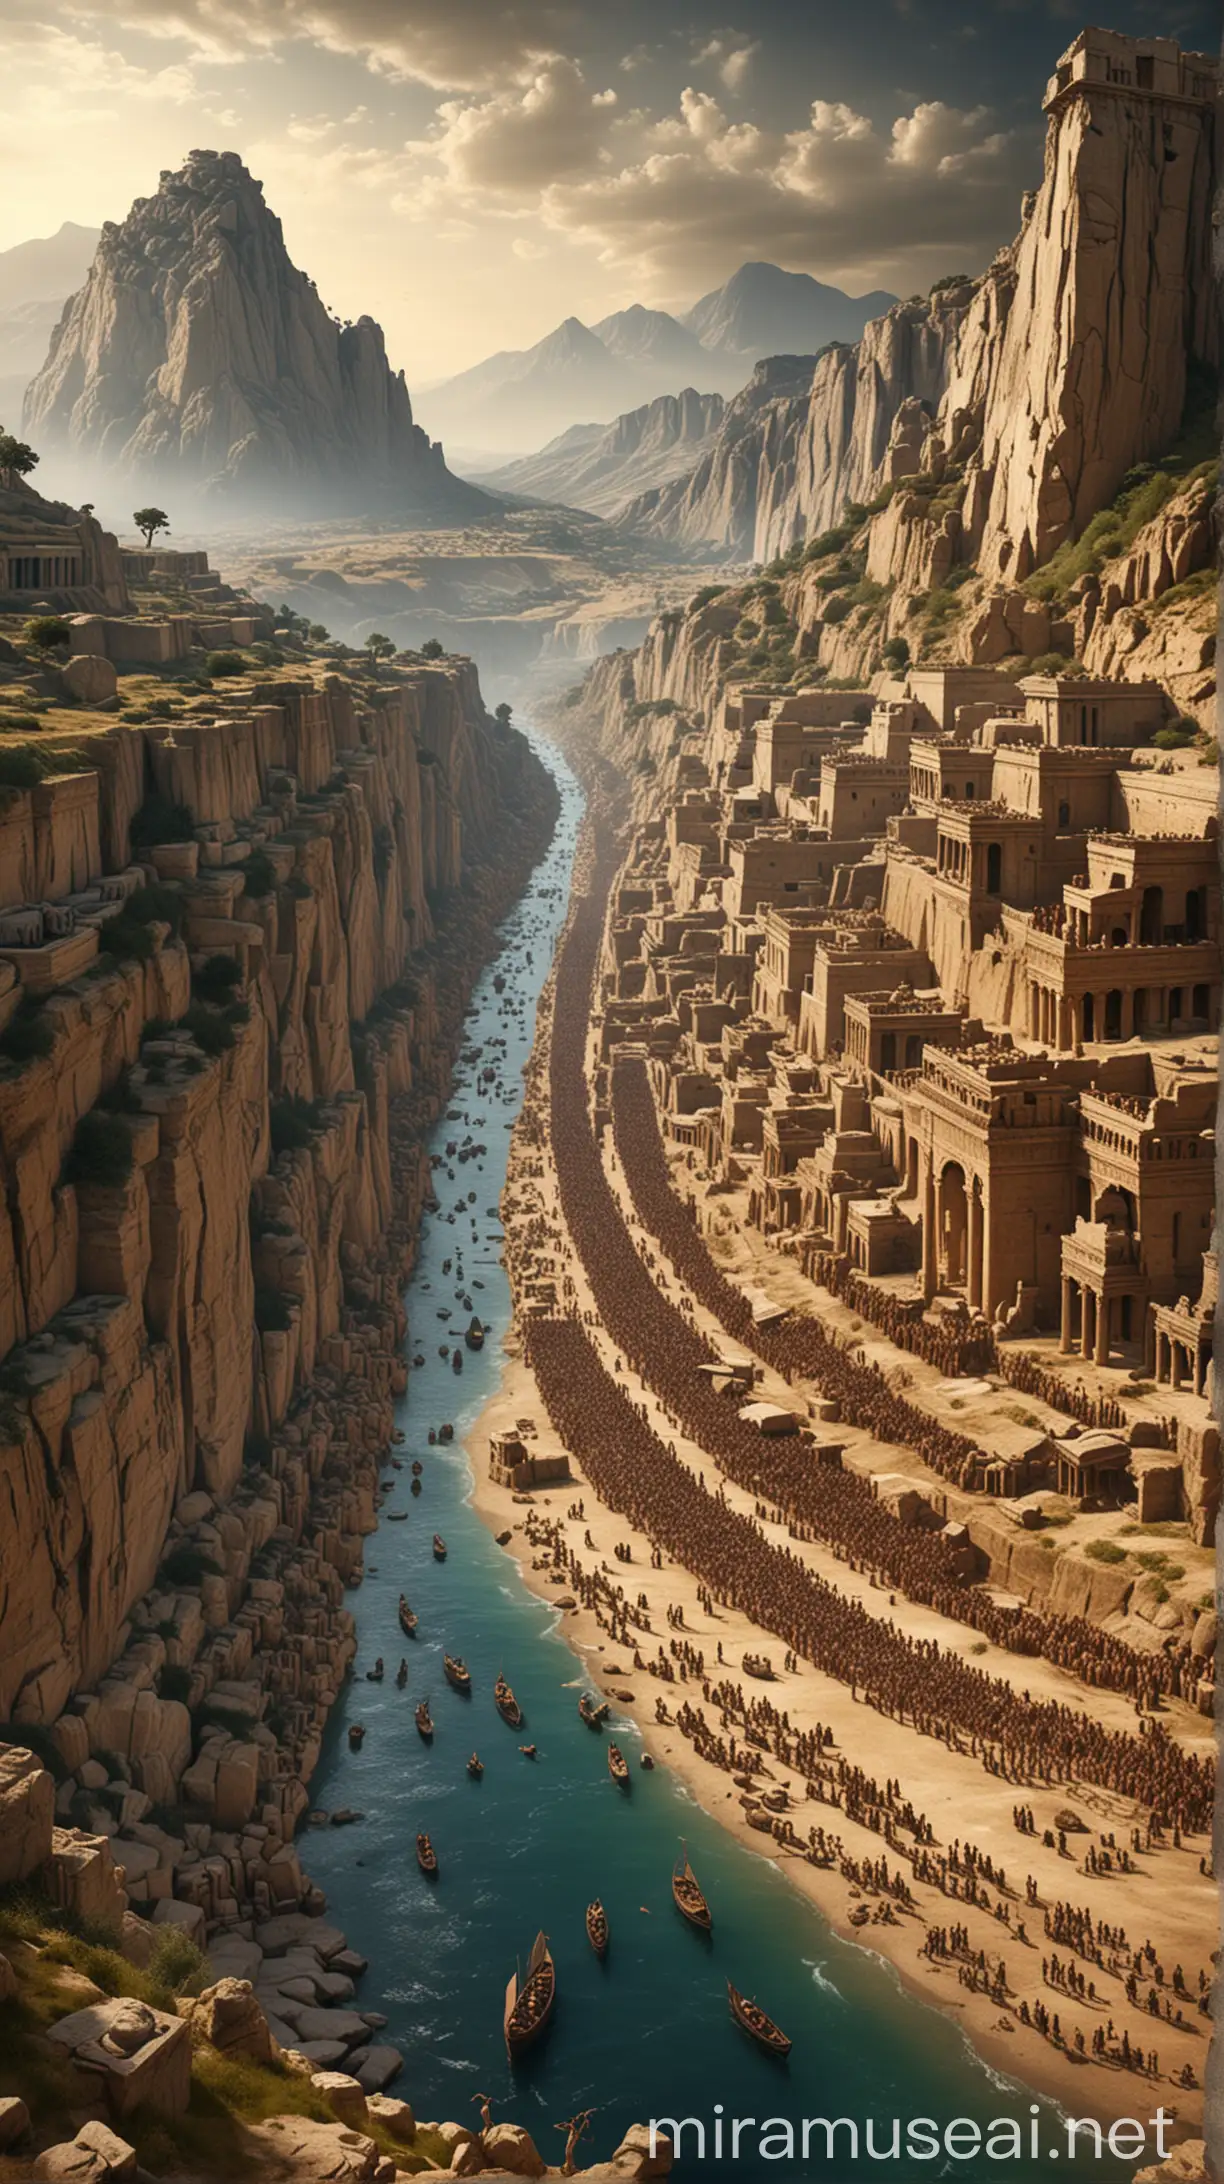 "A scenic image of the ancient world, with Alexander's empire stretching from Greece to India." hyper realistic